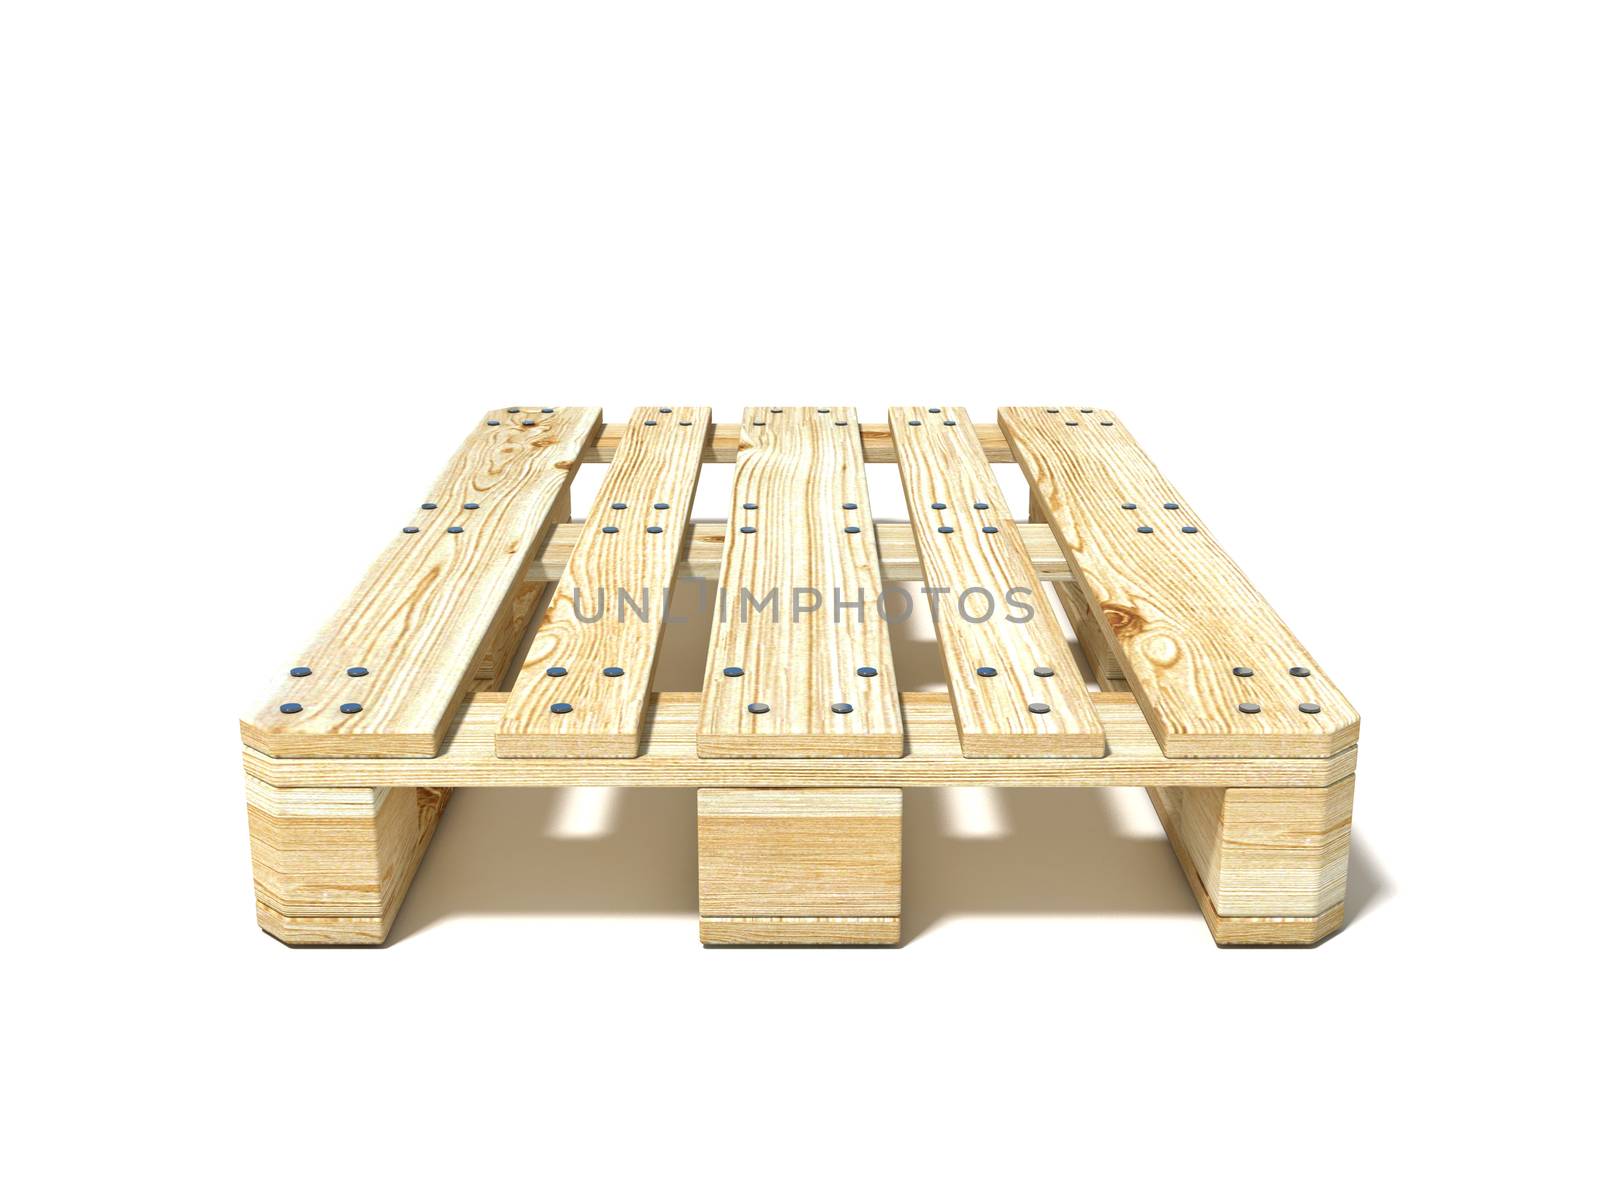 Euro pallet. Front view. 3D render illustration isolated on white background